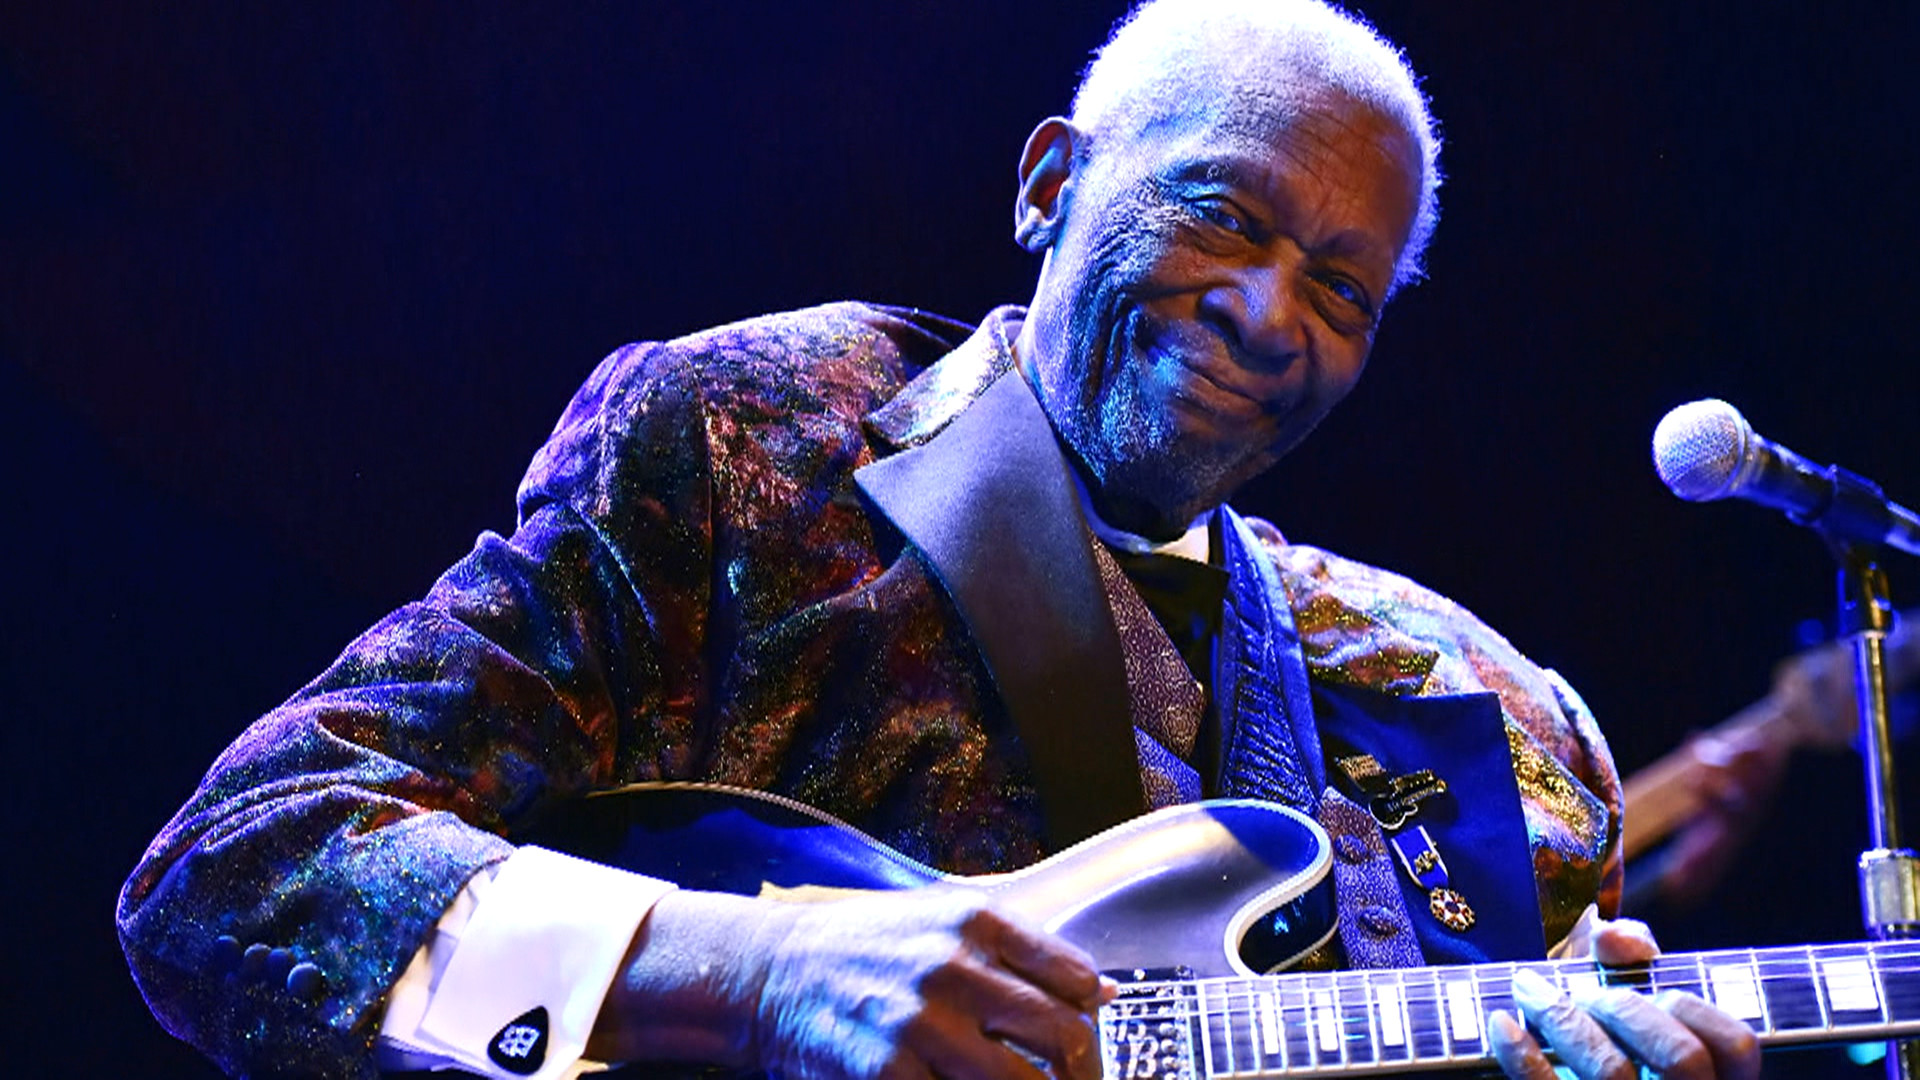 1920x1080 Autopsy Finds B.B. King Died of Natural Causes, Not Foul Play - NBC News